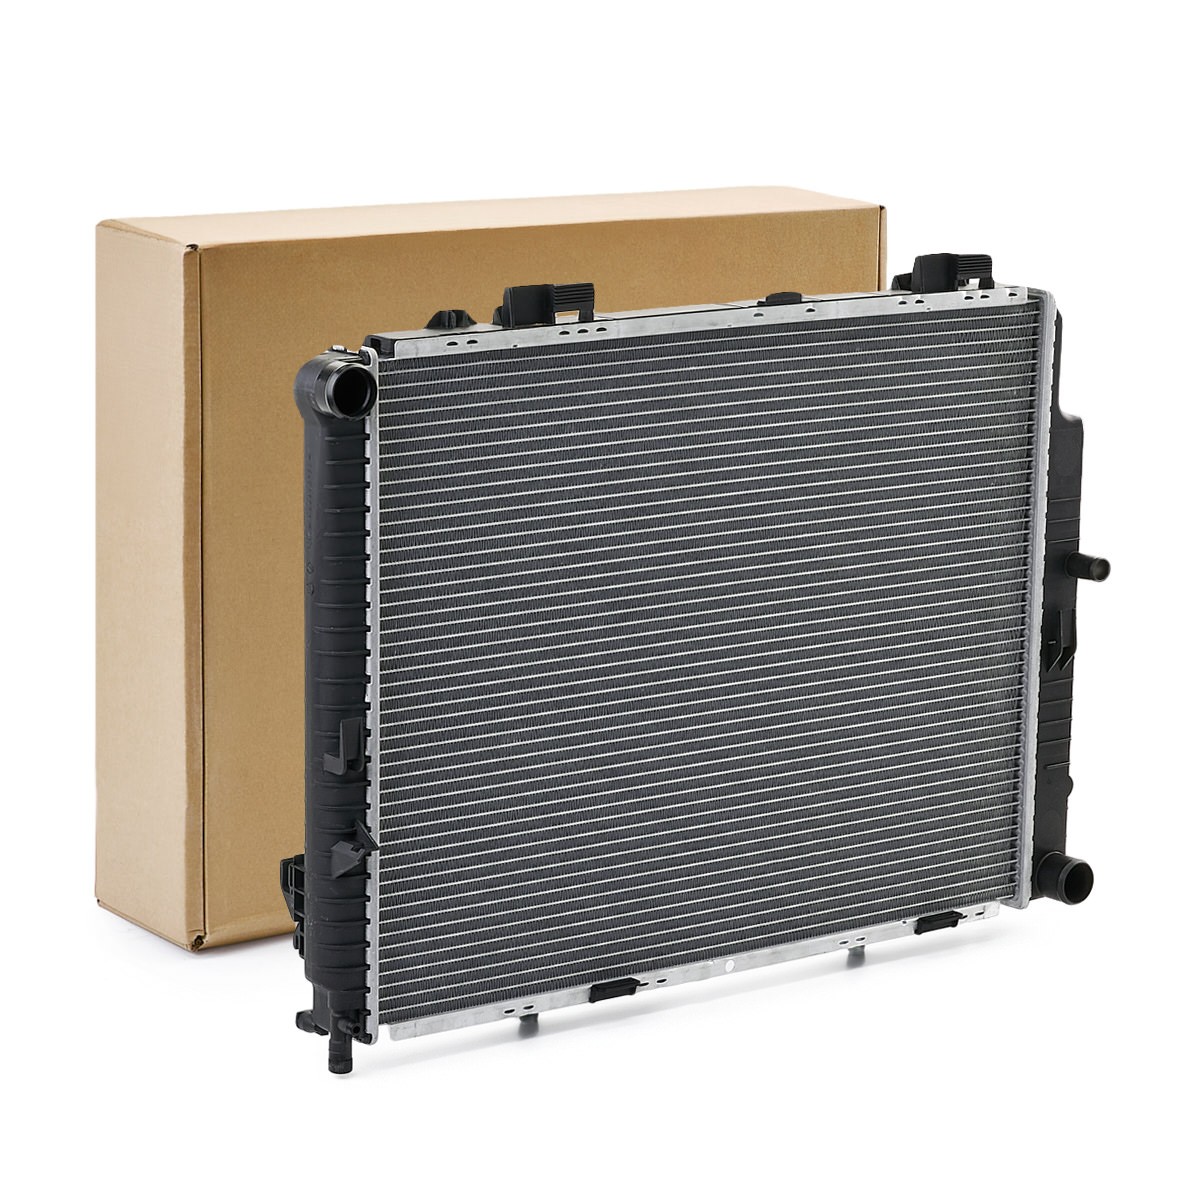 RIDEX 470R0386 Engine radiator Aluminium, for vehicles with/without air conditioning, Manual Transmission, Automatic Transmission, Parallel cooling pipes